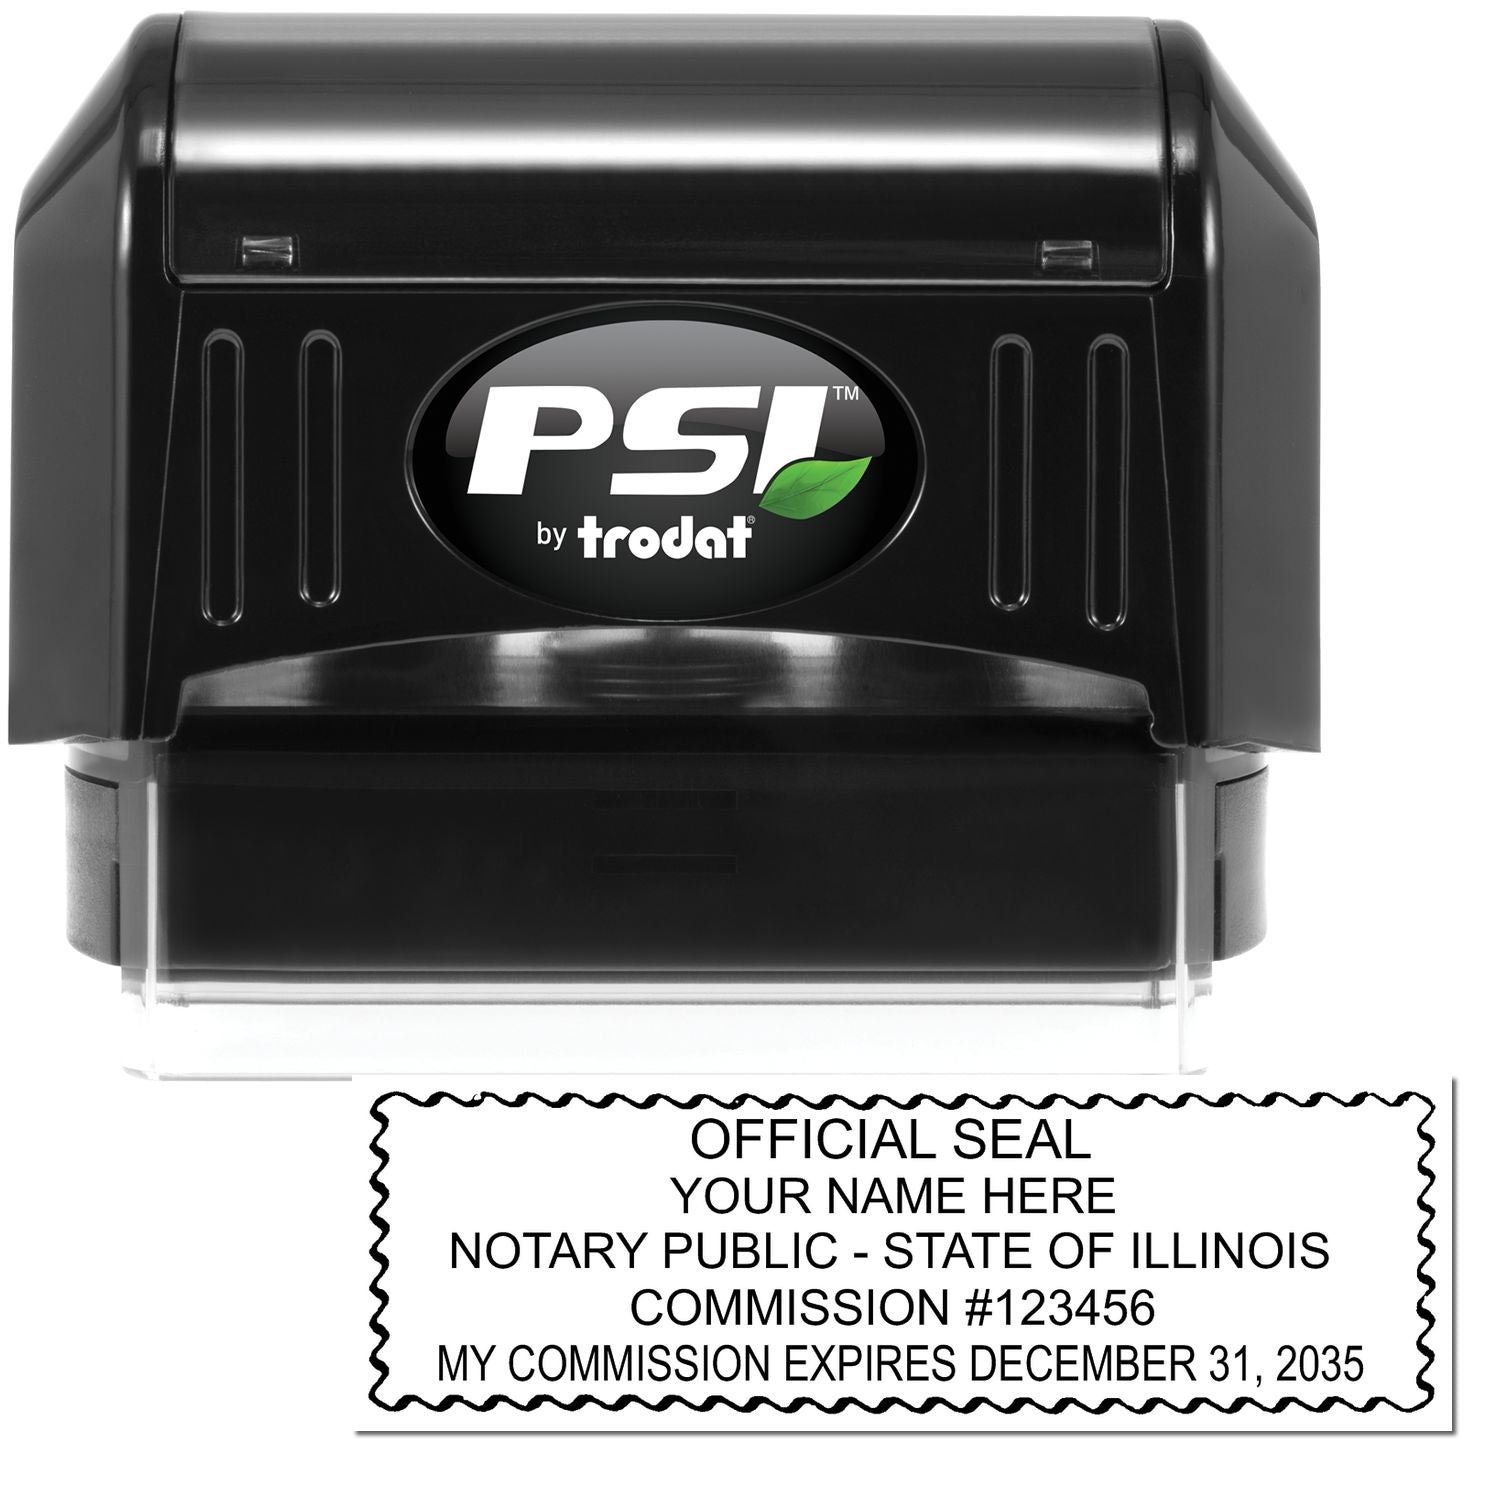 The main image for the PSI Illinois Notary Stamp depicting a sample of the imprint and electronic files